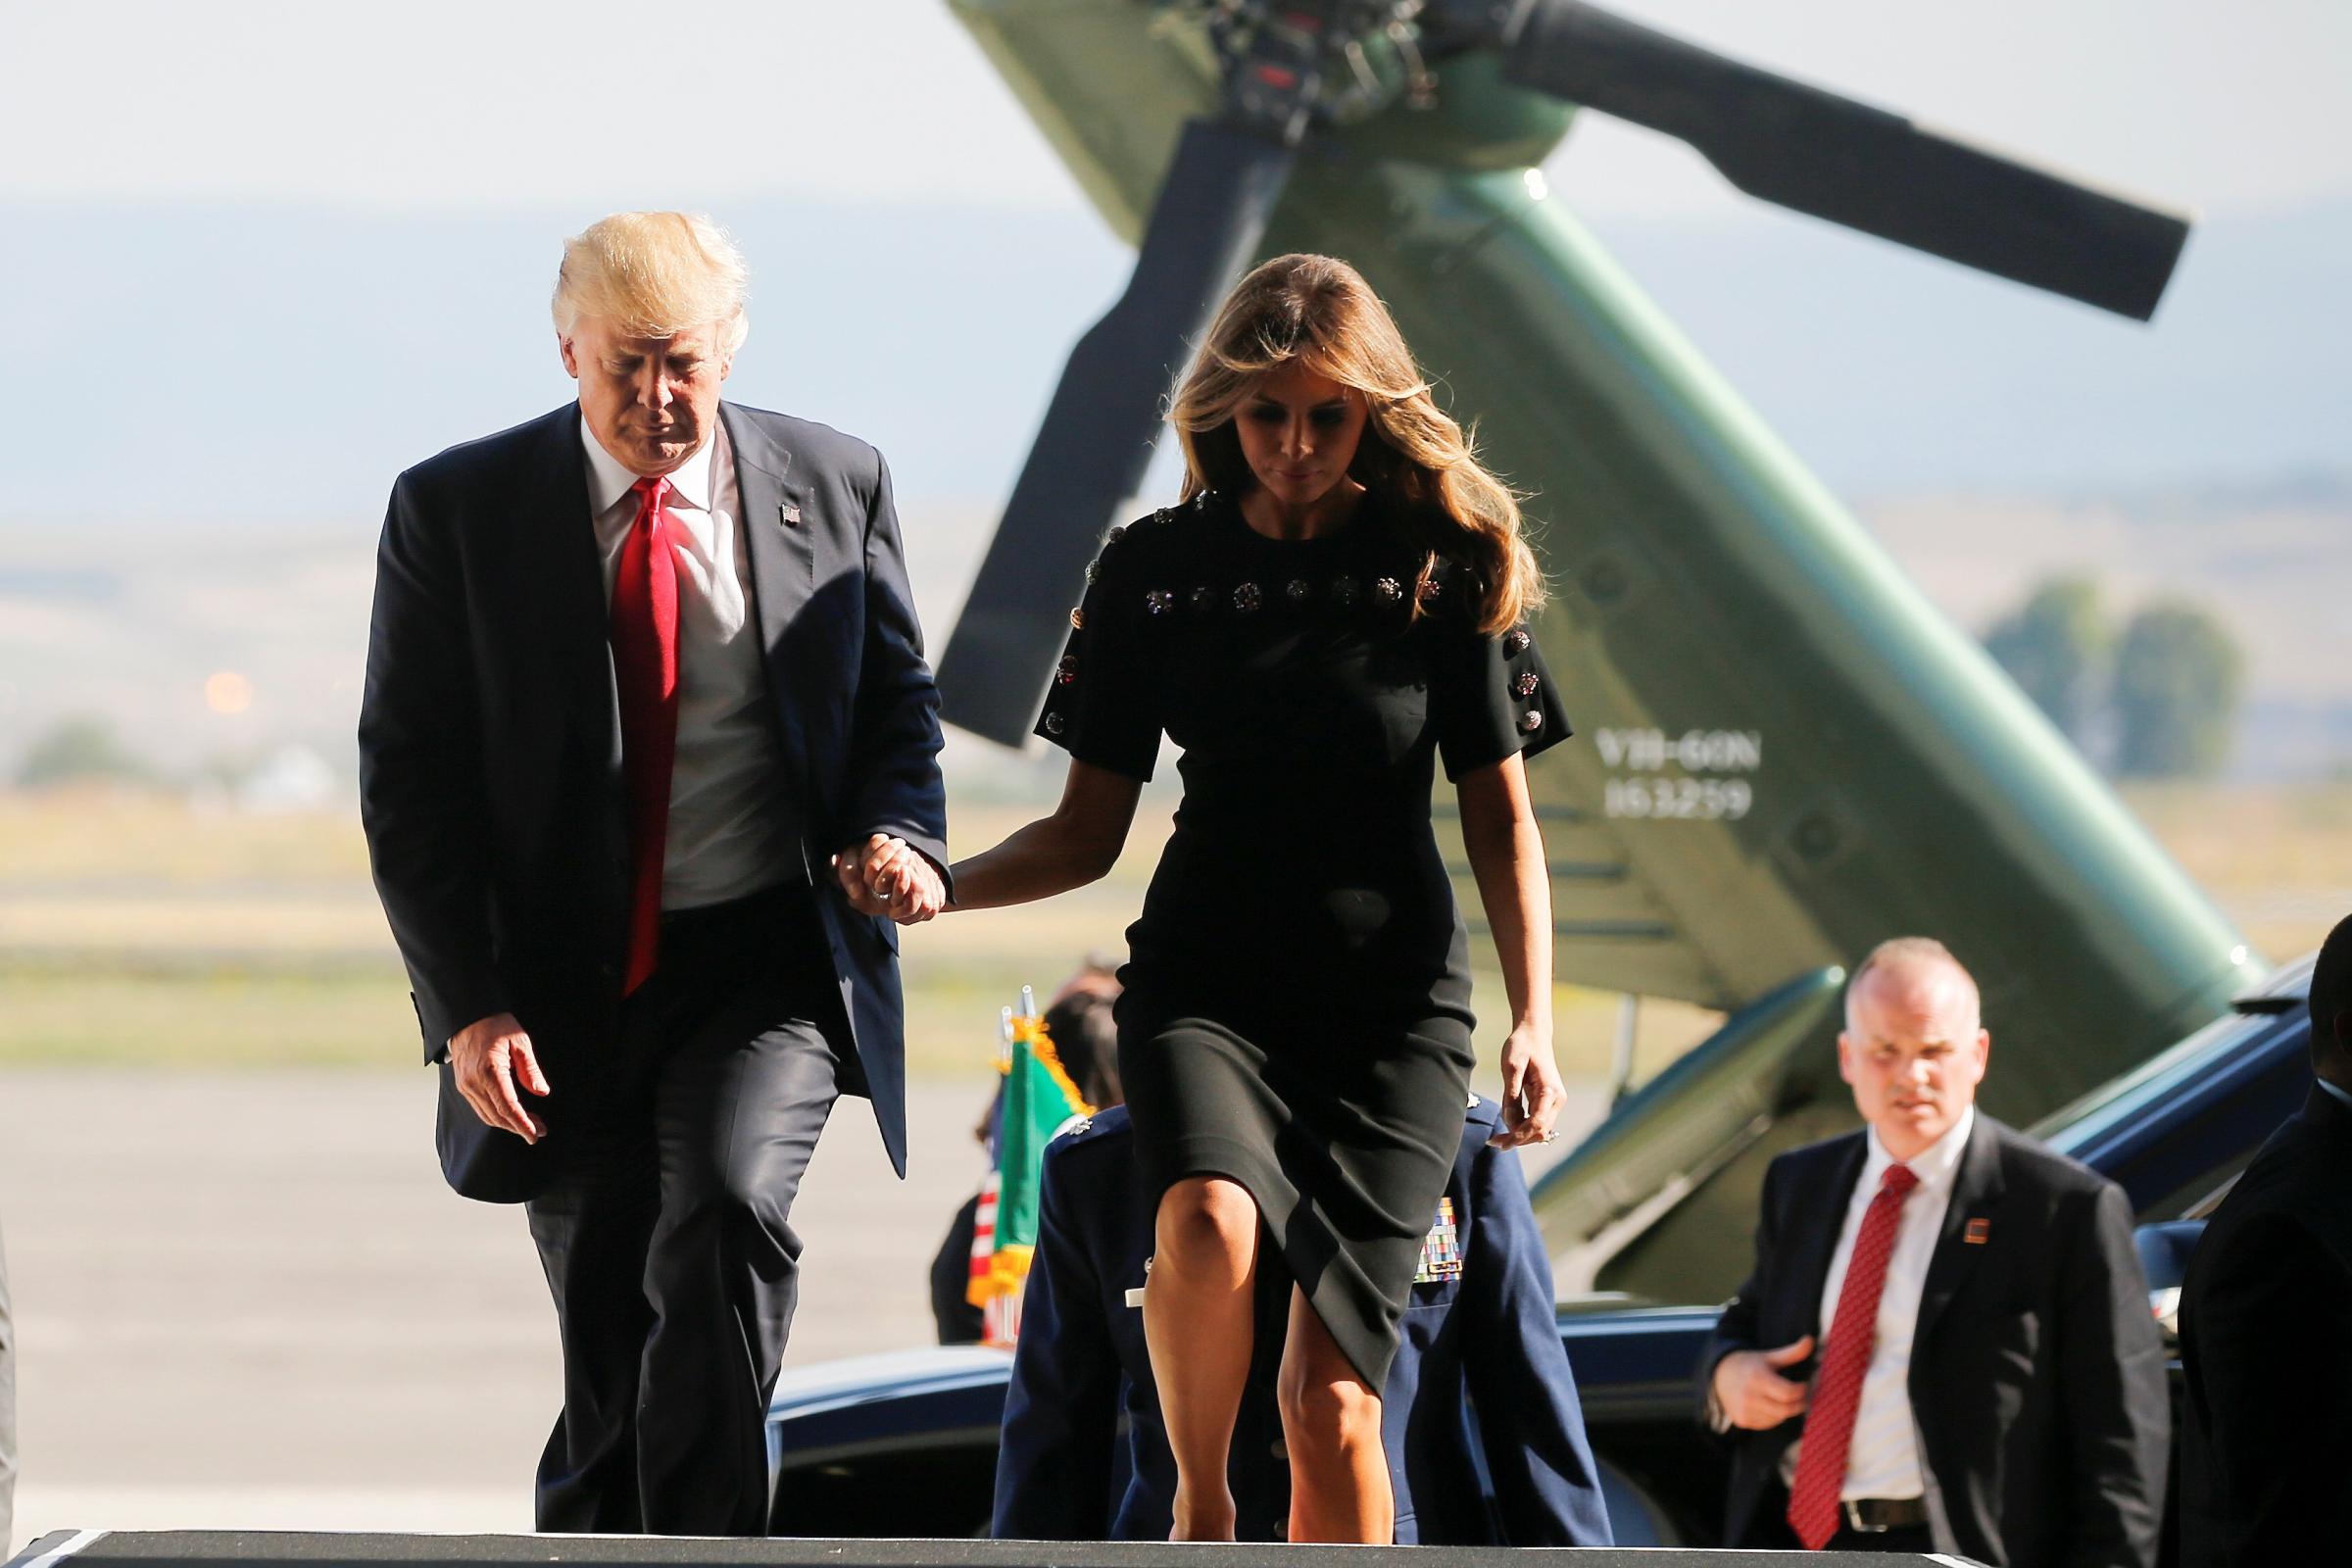 U.S. President Trump and first lady Melania Trump hold hands as they arrive at the Naval Air Station Sigonella to visit U.S. troops before returning to Washington D.C. at Sigonella Air Force Base in Sigonella